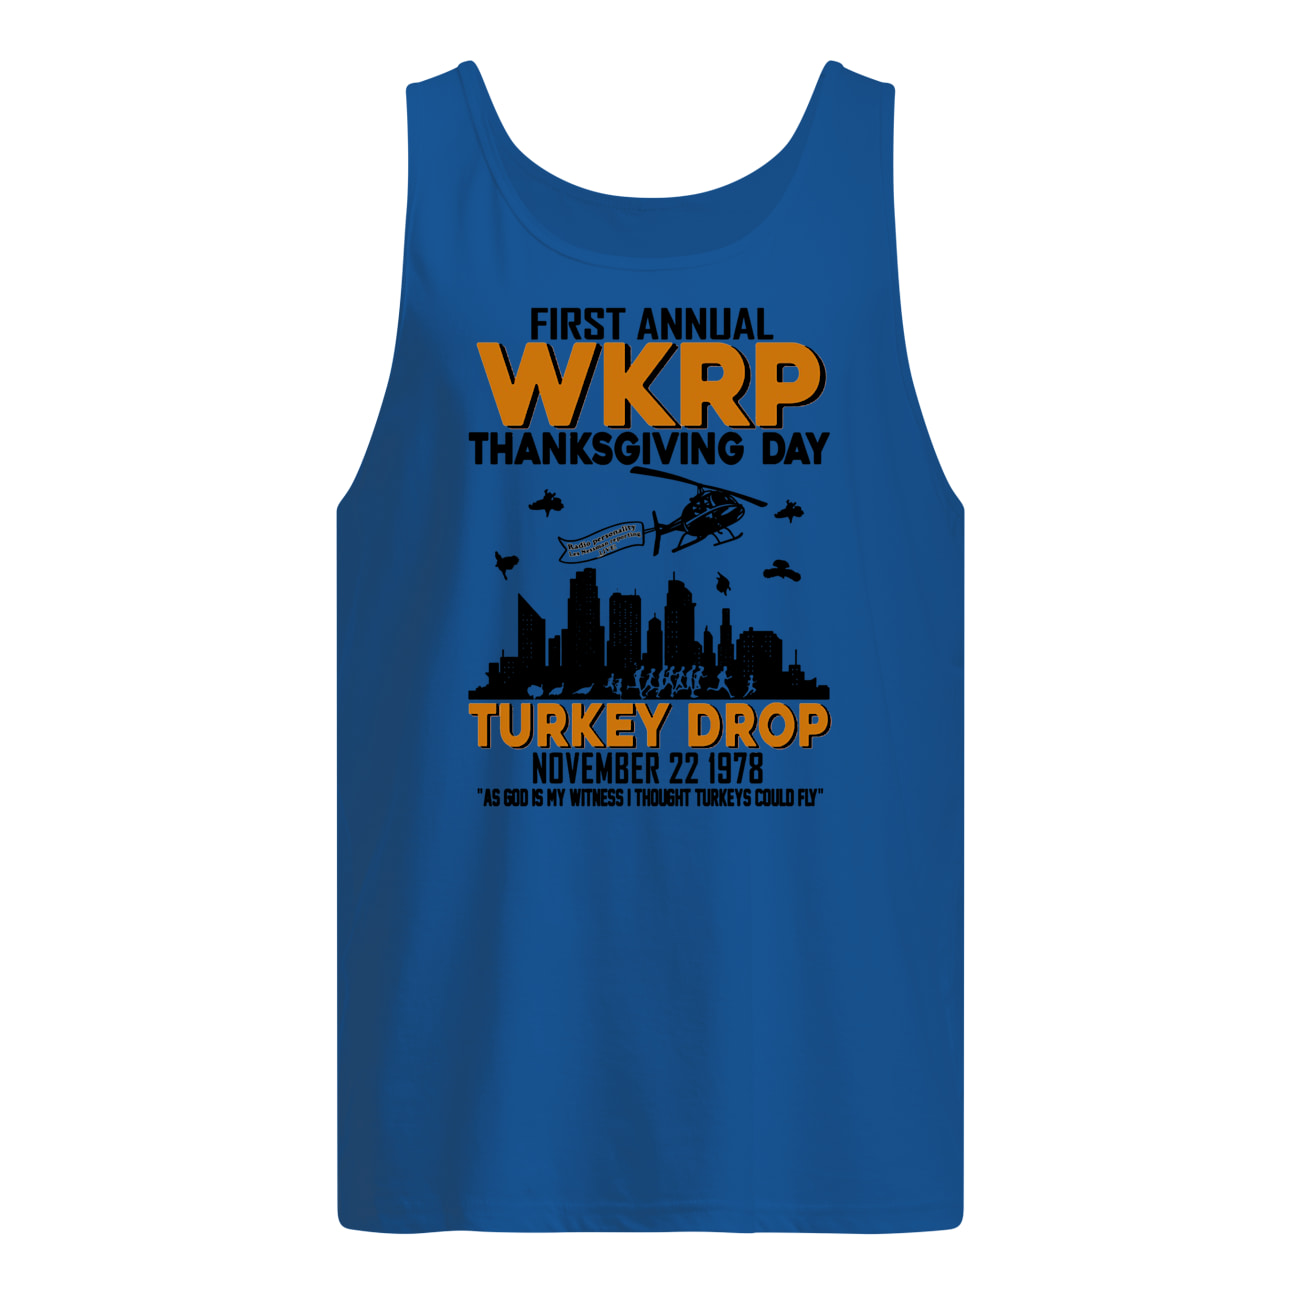 First annual wkrp thanksgiving day turkey drop november 22 1978 tank top